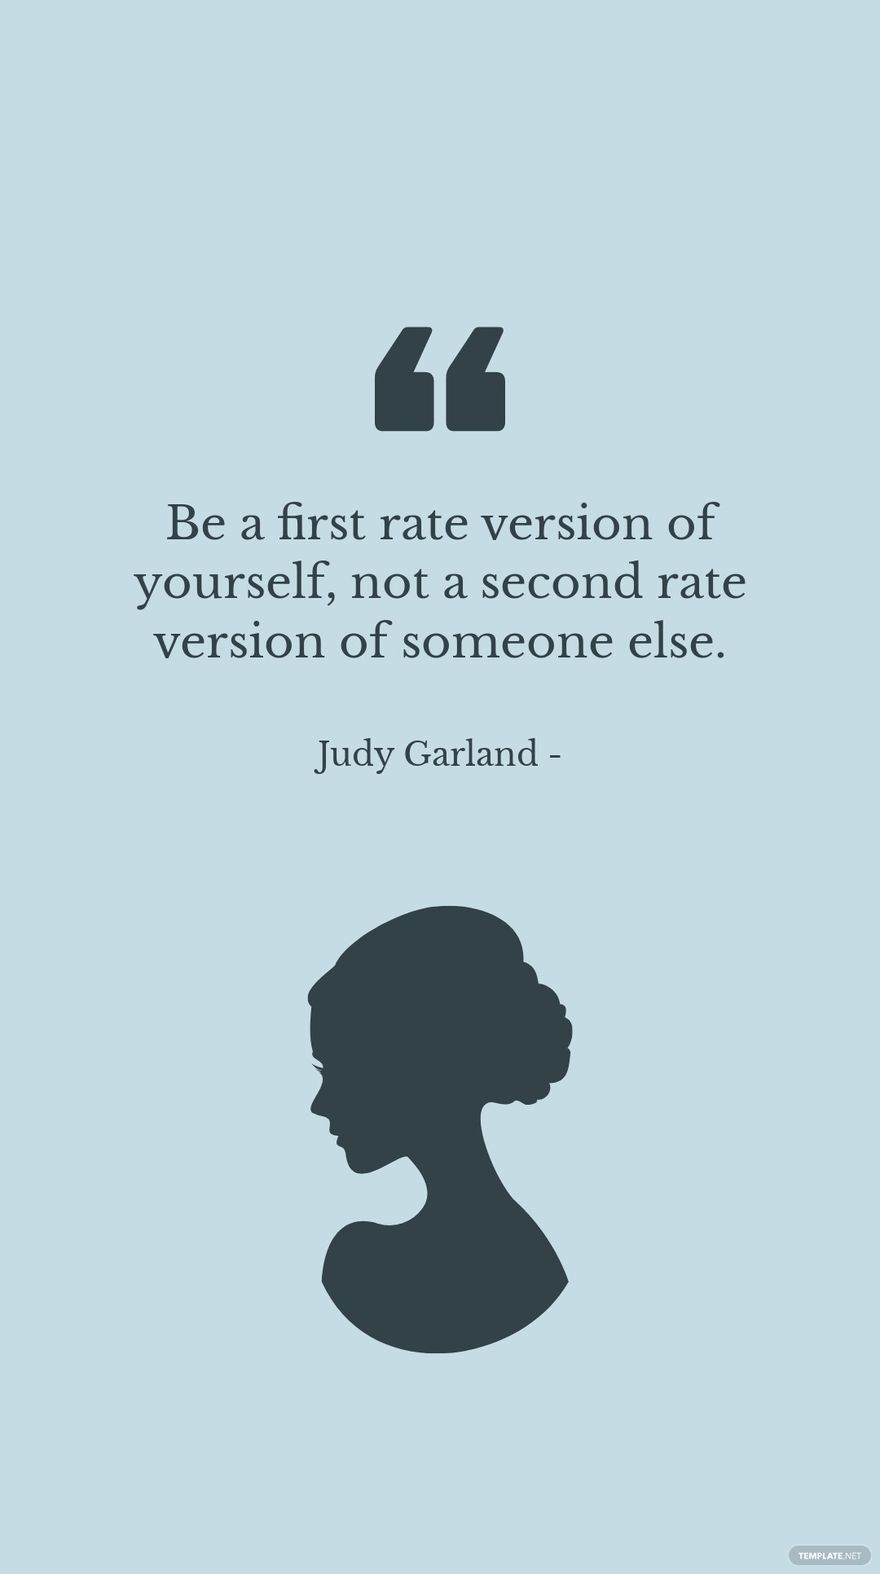 Judy Garland - Be a first rate version of yourself, not a second rate version of someone else. in JPG